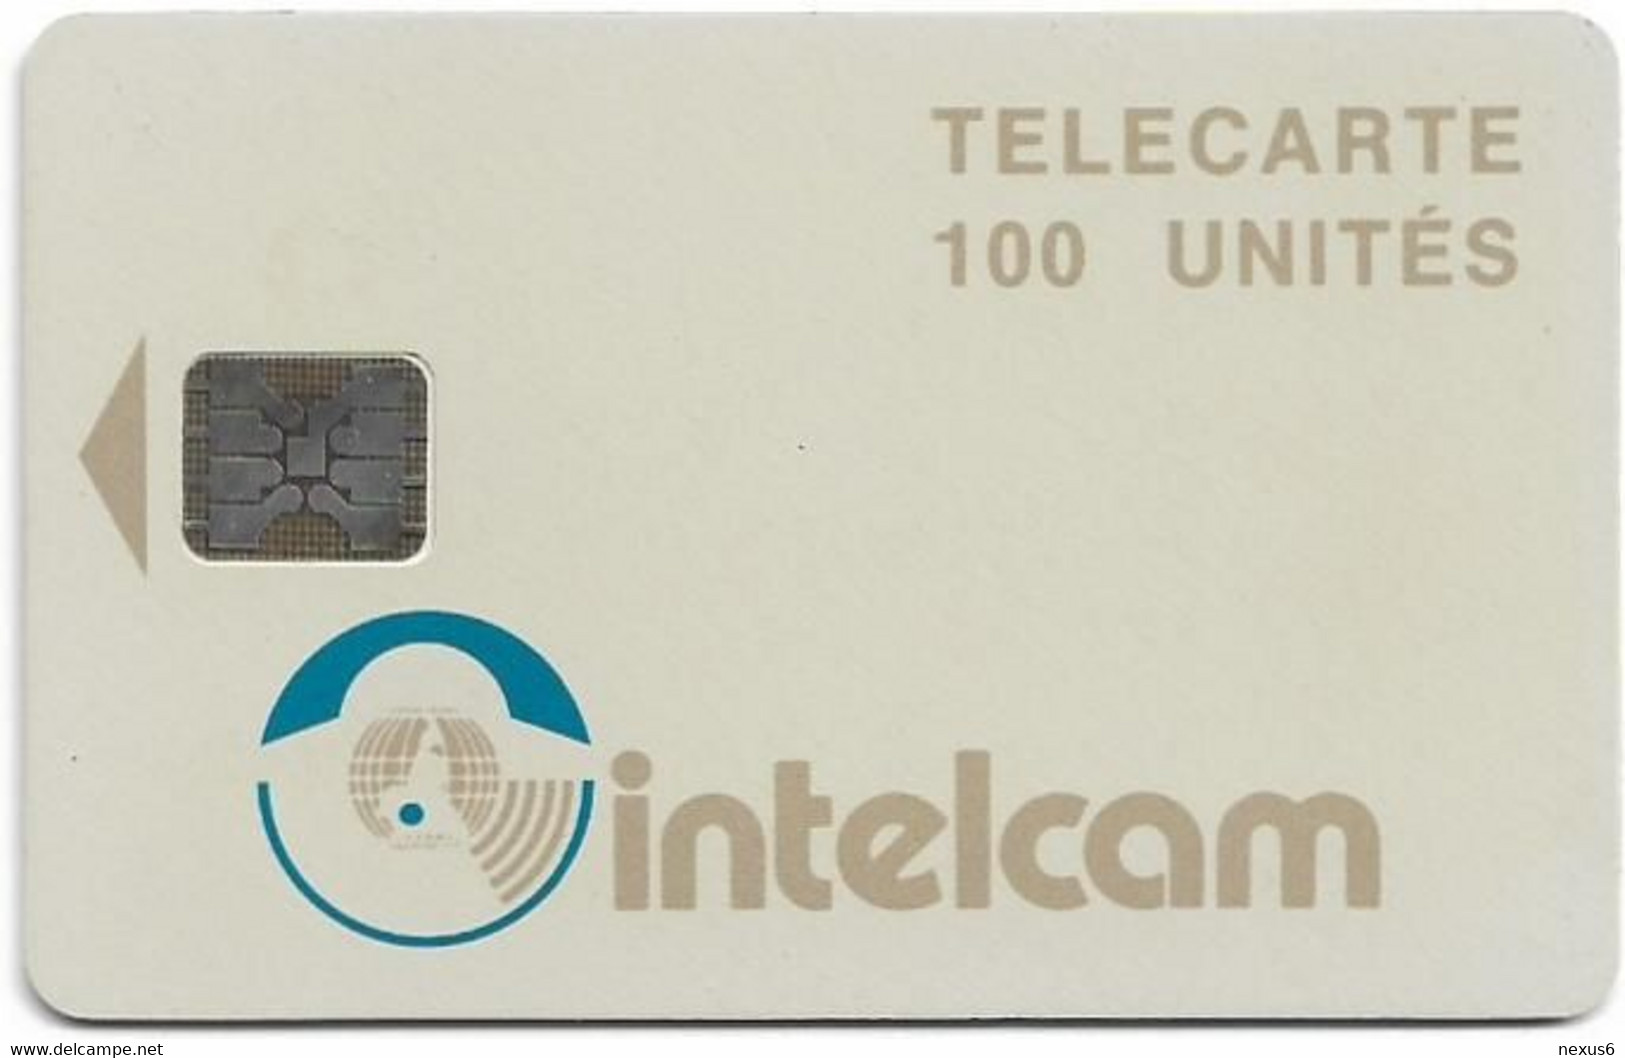 Cameroon - Intelcam - Chip - Logo Card - SC5 ISO, Glossy, Cn.C46100859, 100Units, Used - Camerún